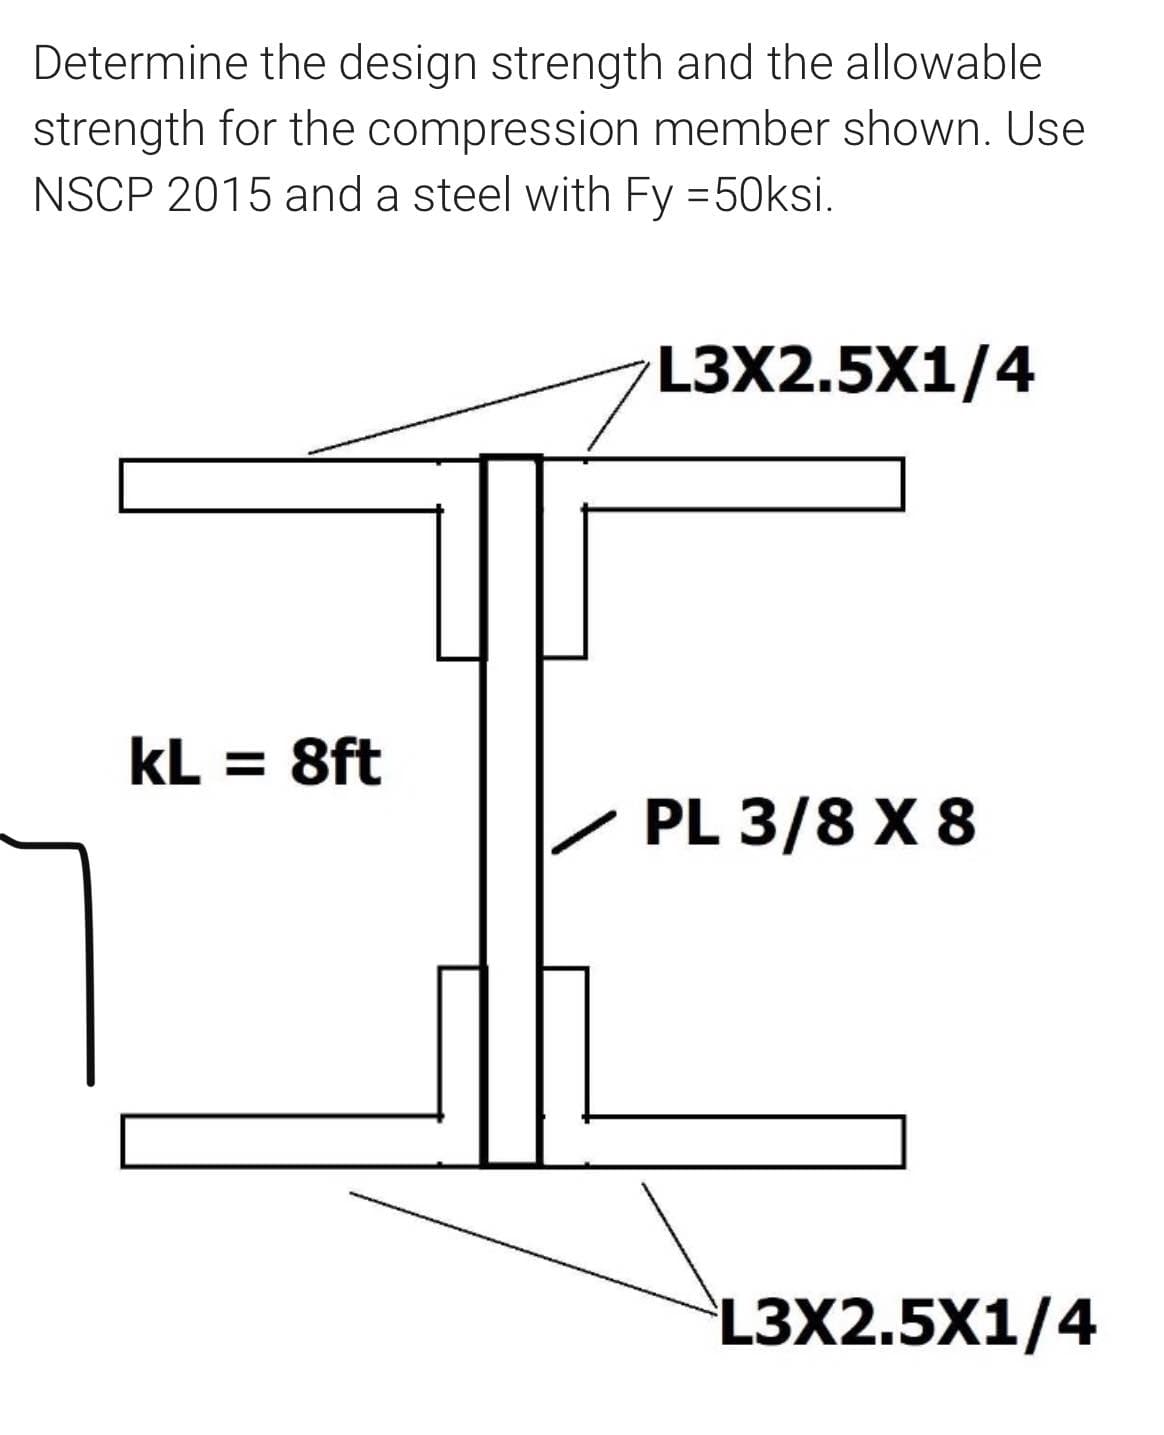 Determine the design strength and the allowable
strength for the compression member shown. Use
NSCP 2015 and a steel with Fy =50ksi.
L3X2.5X1/4
kL = 8ft
PL 3/8 X 8
L3X2.5X1/4
